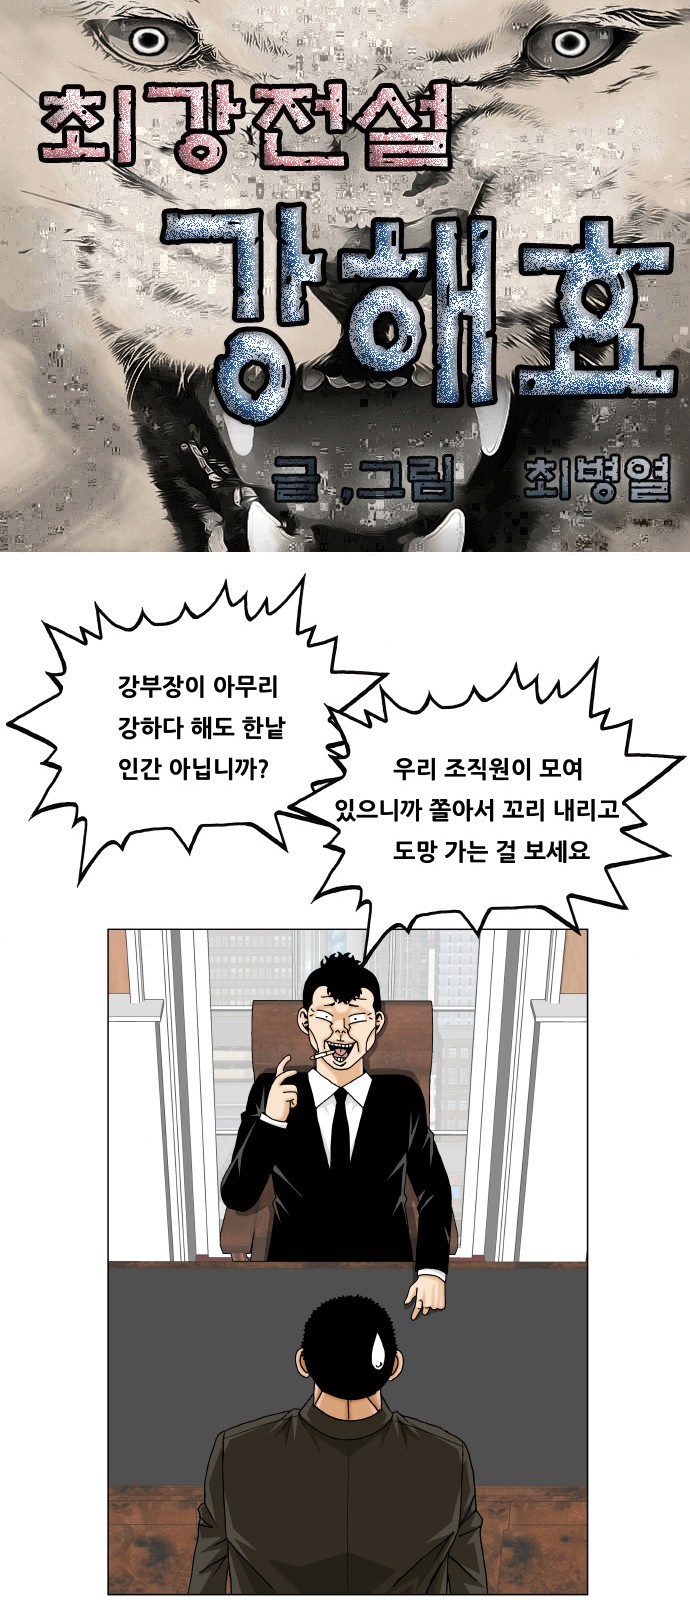 Ultimate Legend - Kang Hae Hyo - Chapter 369 - Page 1